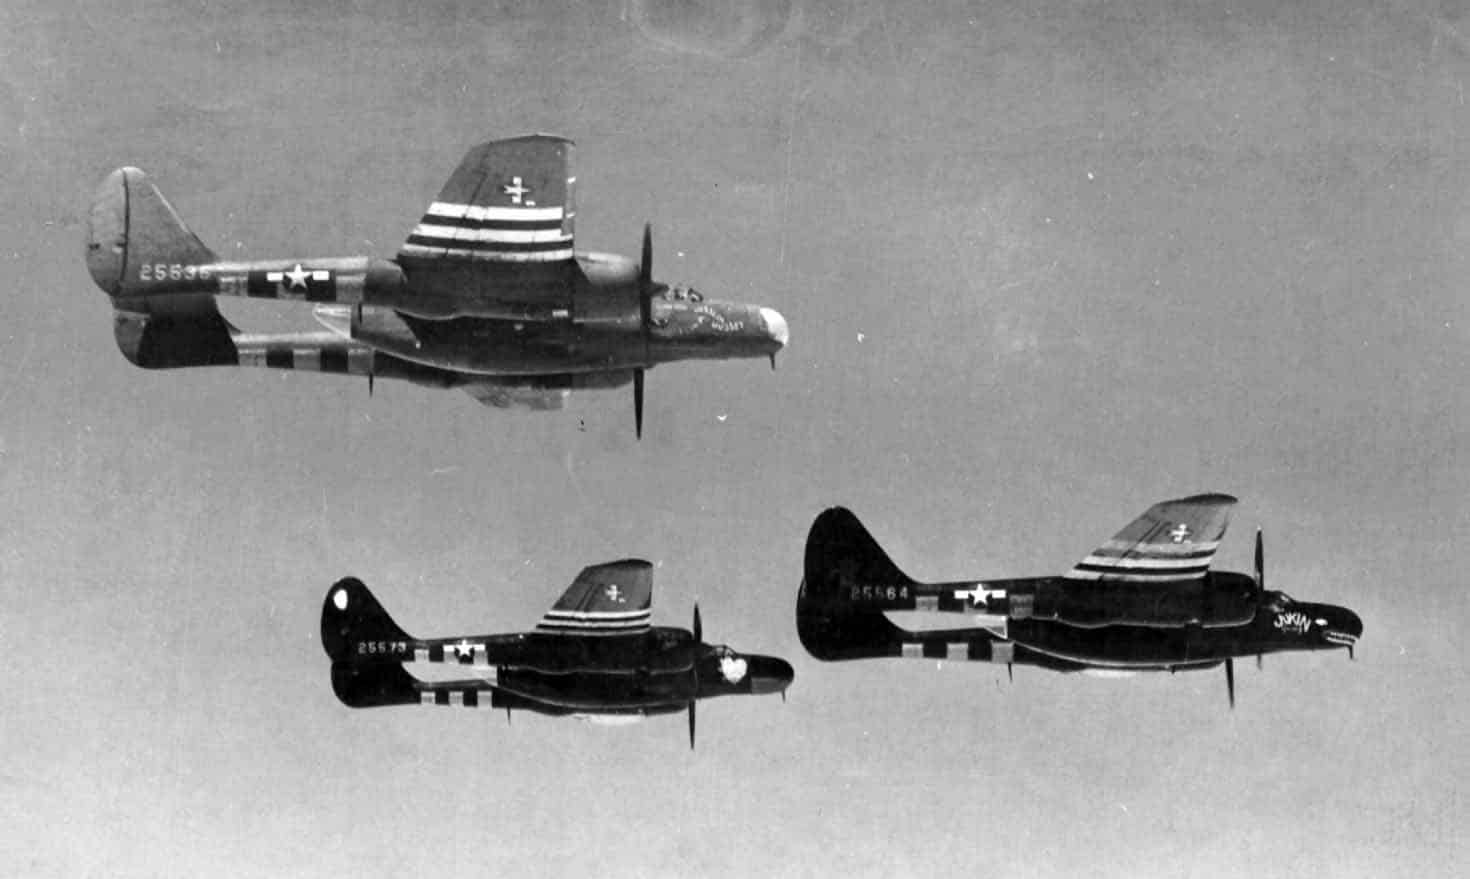 Three P-61S Black Widows flying in formation.